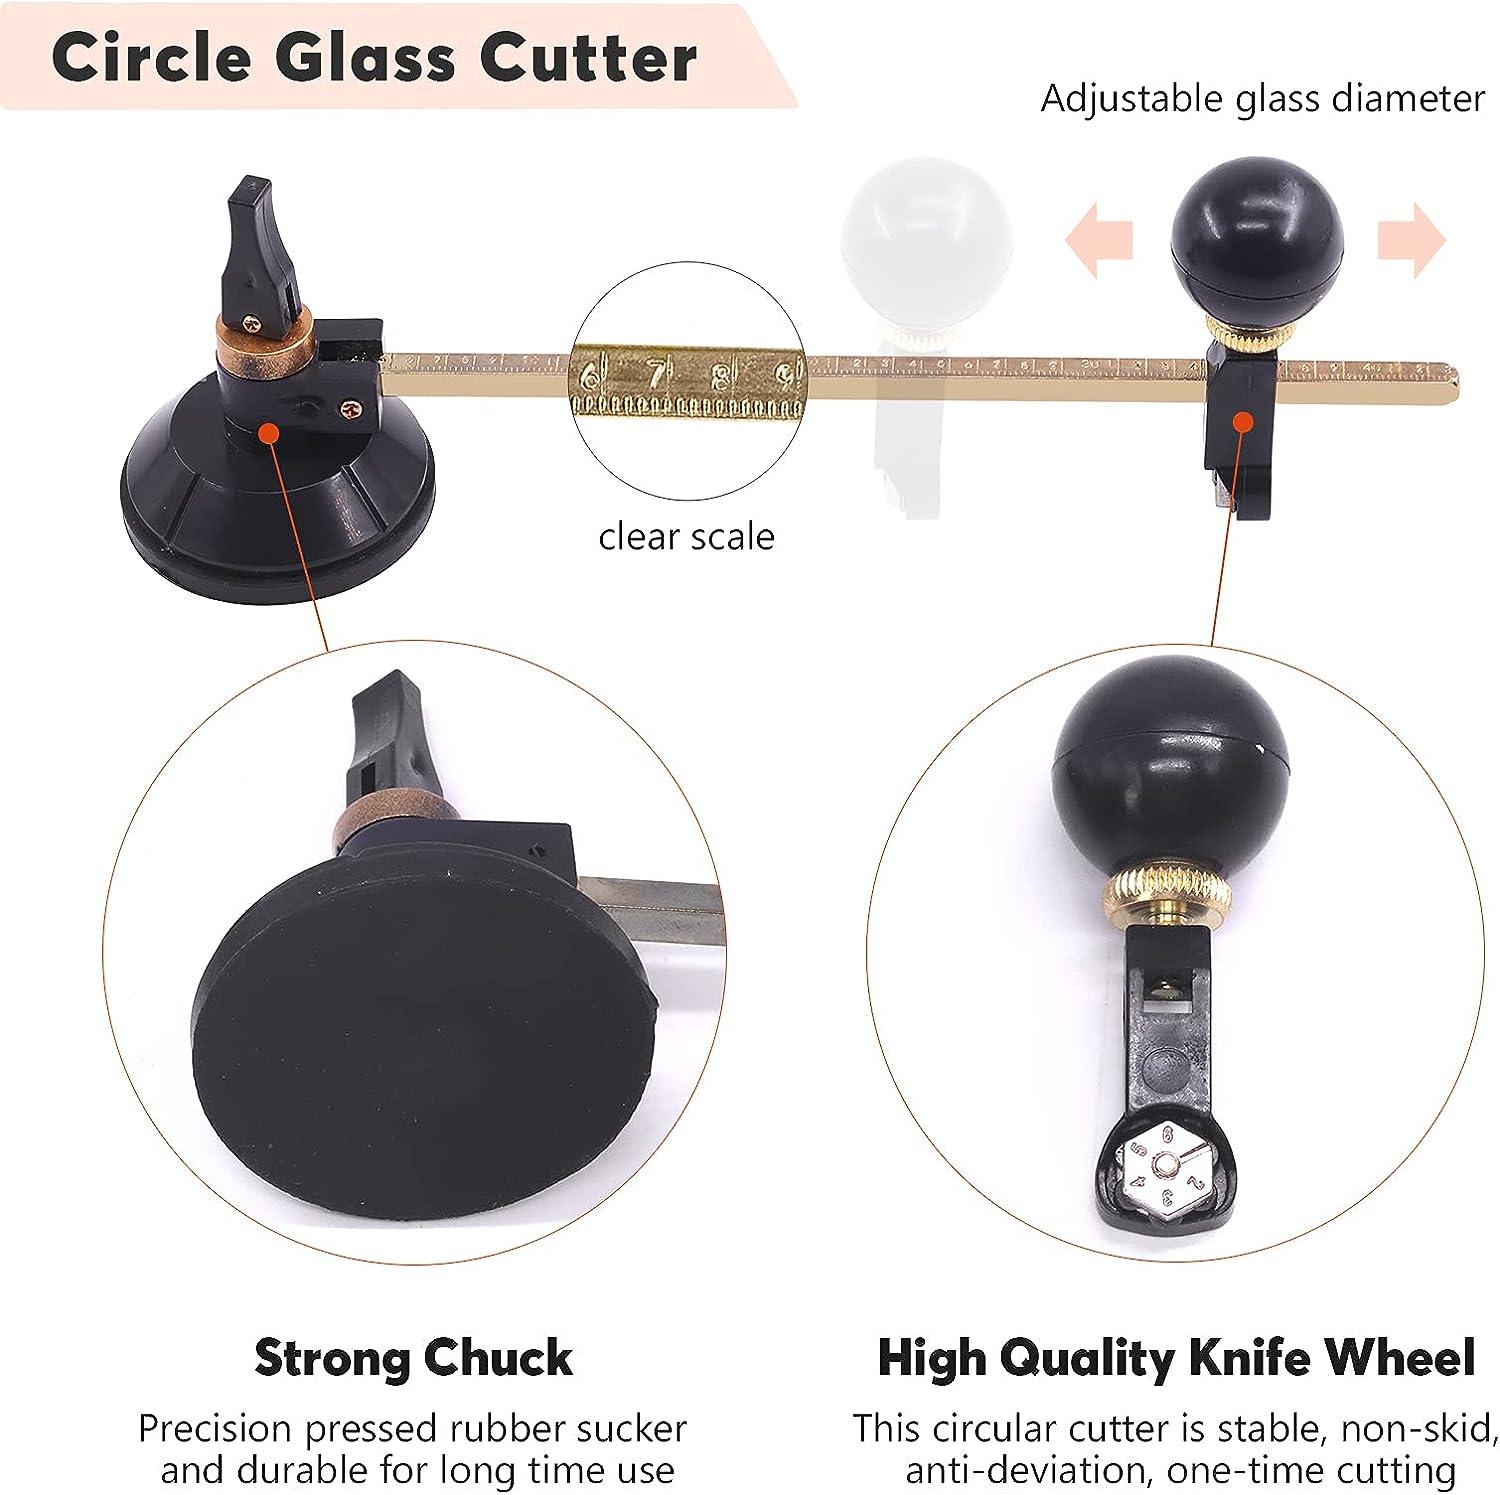  Heavy-duty Circular Glass Cutter with Suction Cup 40